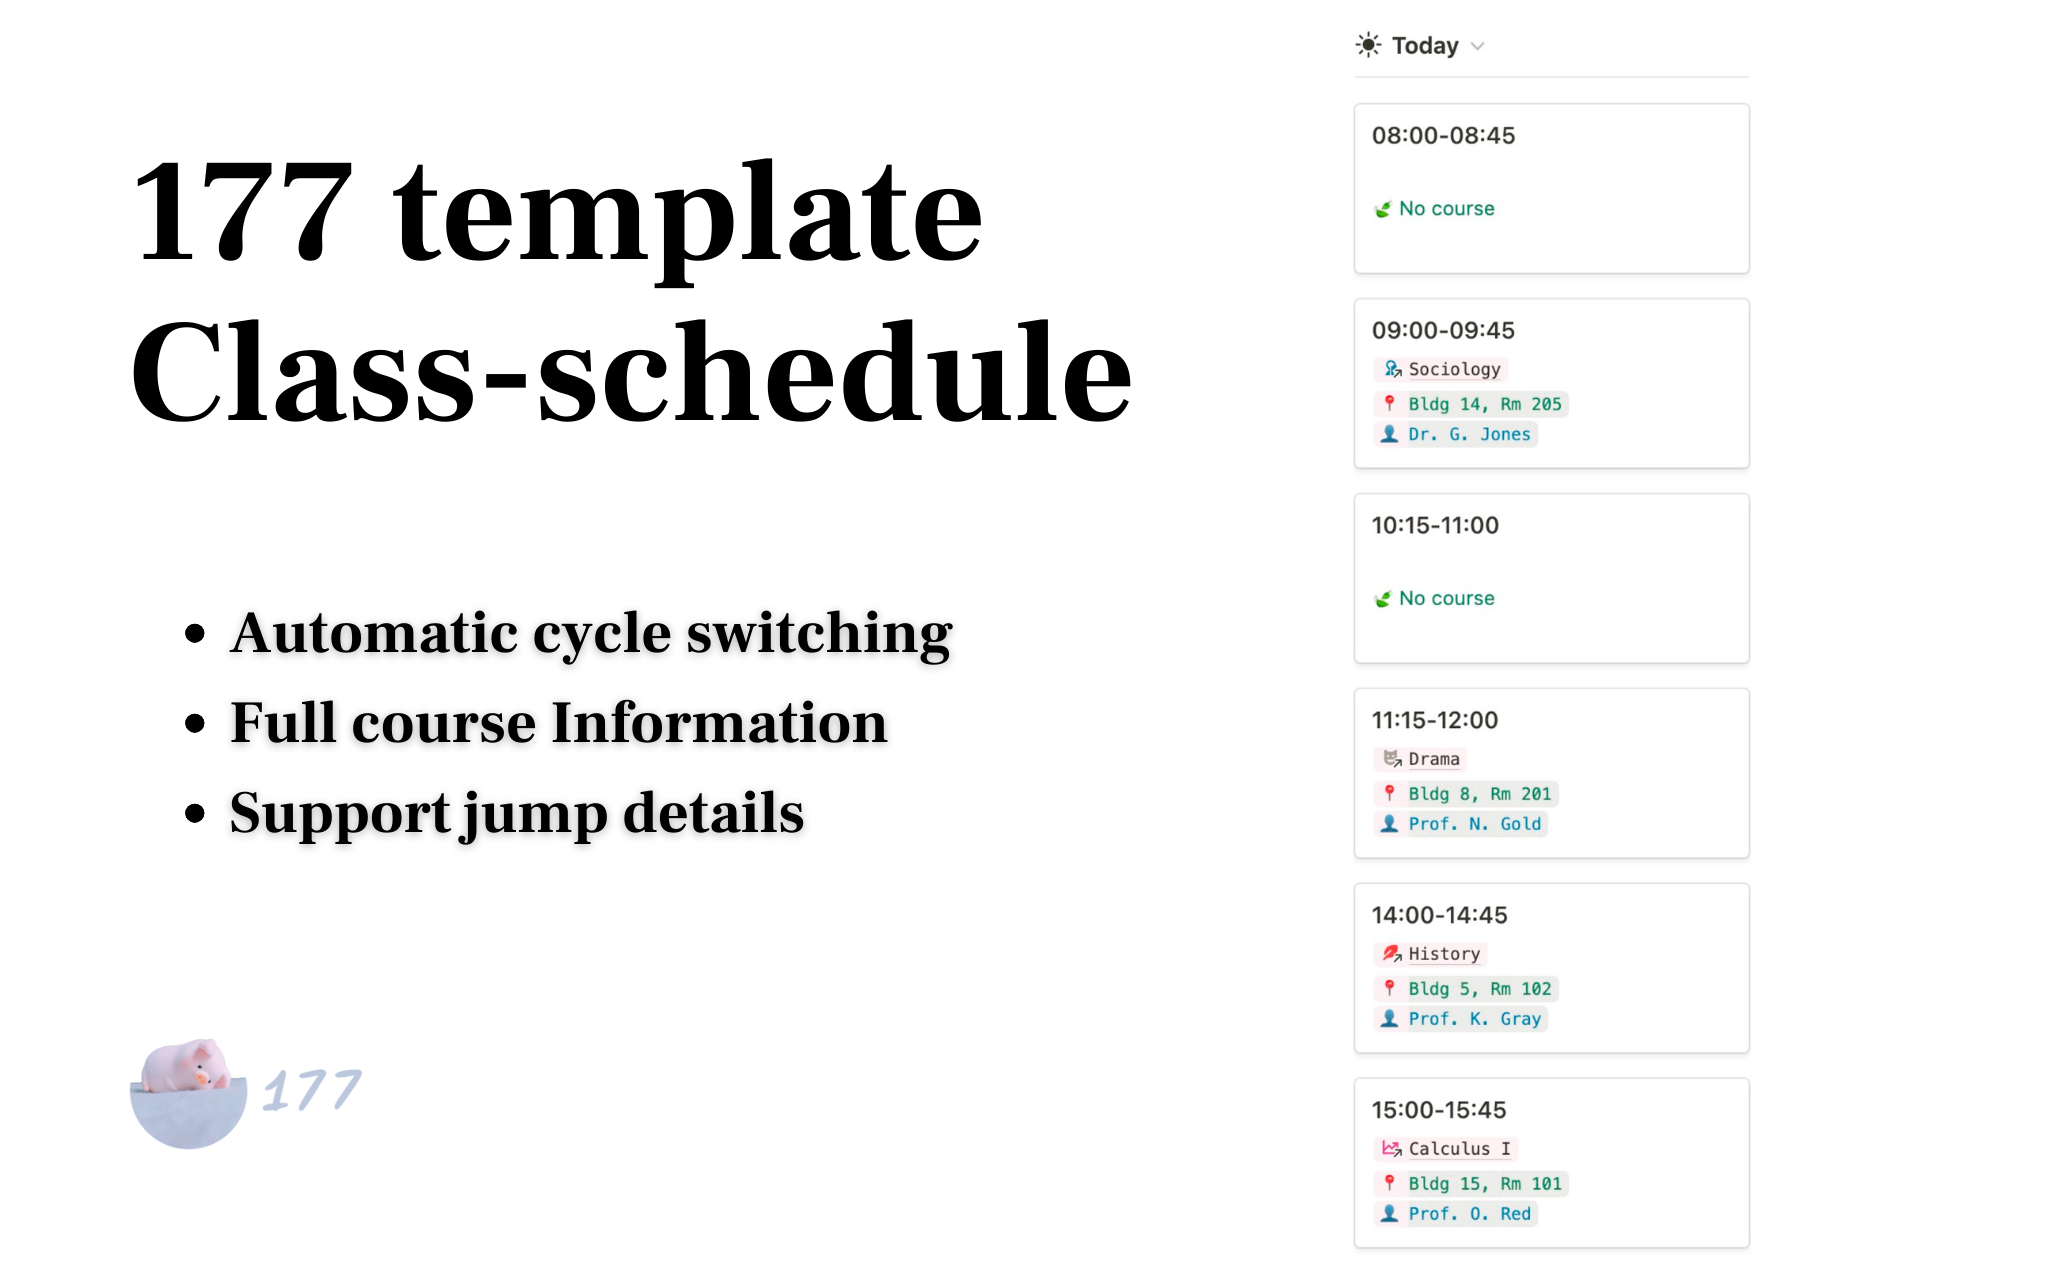 The template is only edited twice a year: once last semester and once next semester.
The "Today'" view fully automates the updating of the daily course schedule, which can be placed directly anywhere on your personal dashboard, etc.